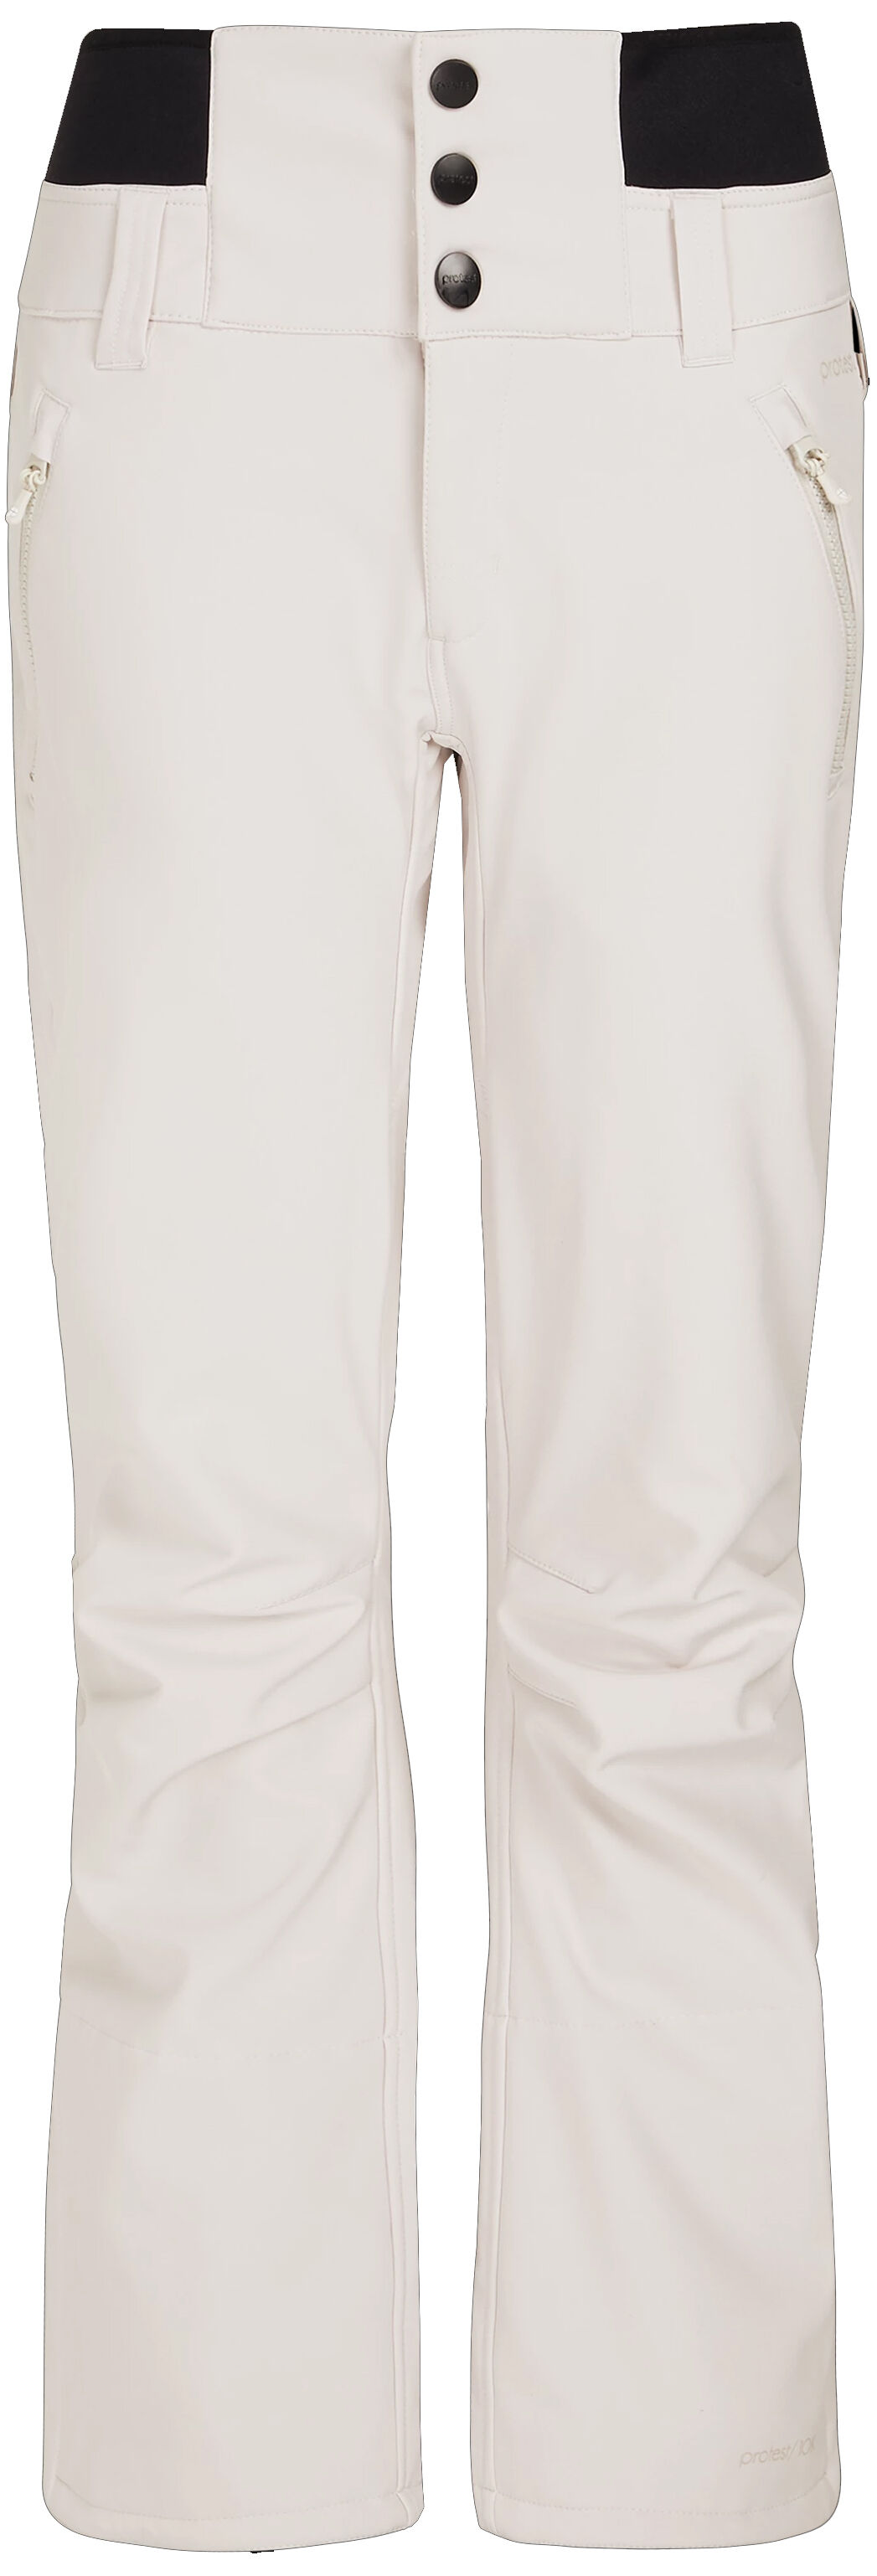 PROTEST LULLABY SOFTSHELL KITOFFWHITE S